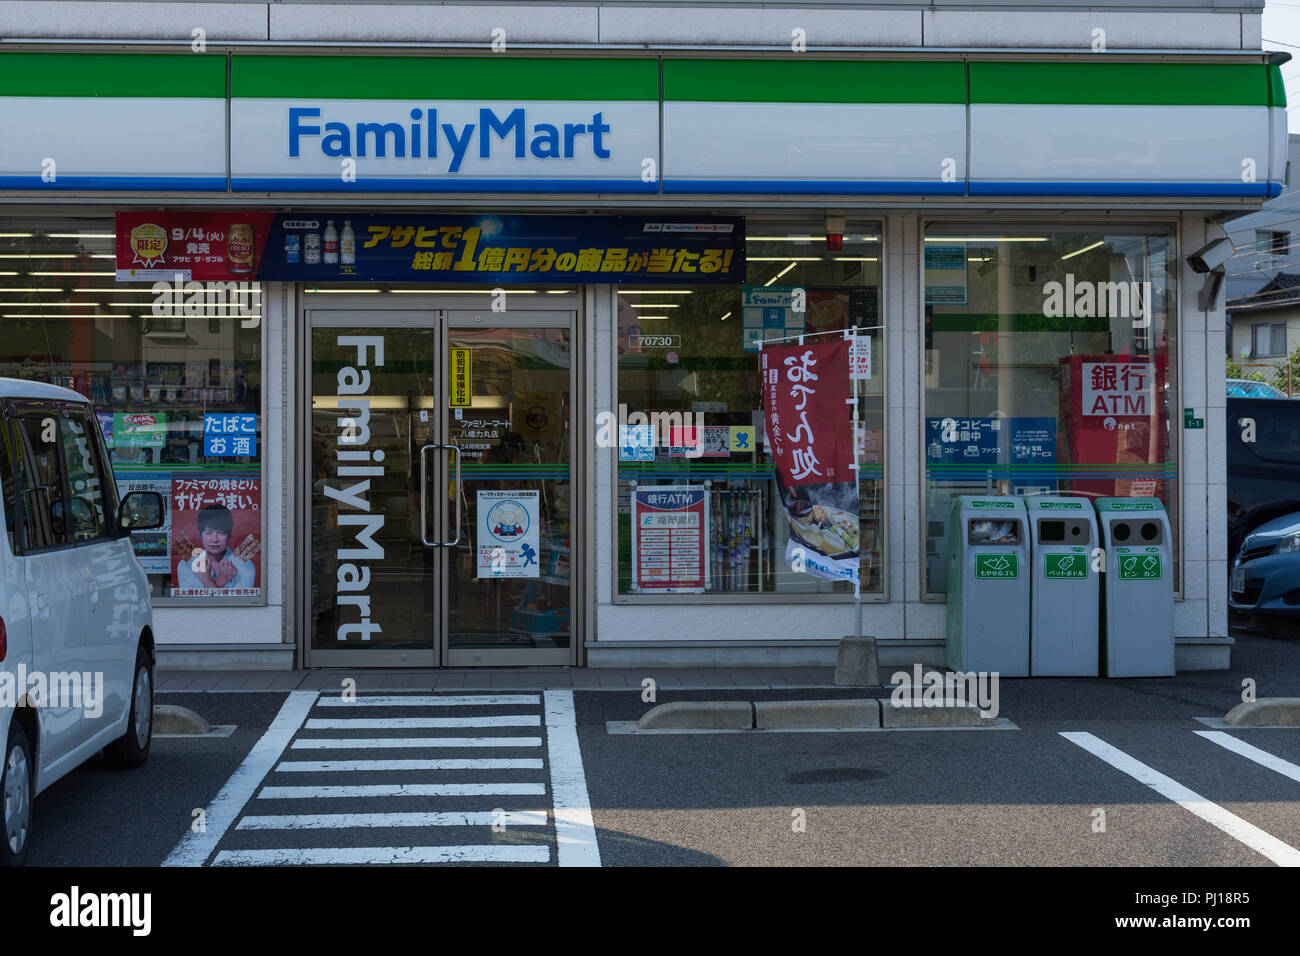 Family Mart Convenience Store in Japan Stockfoto